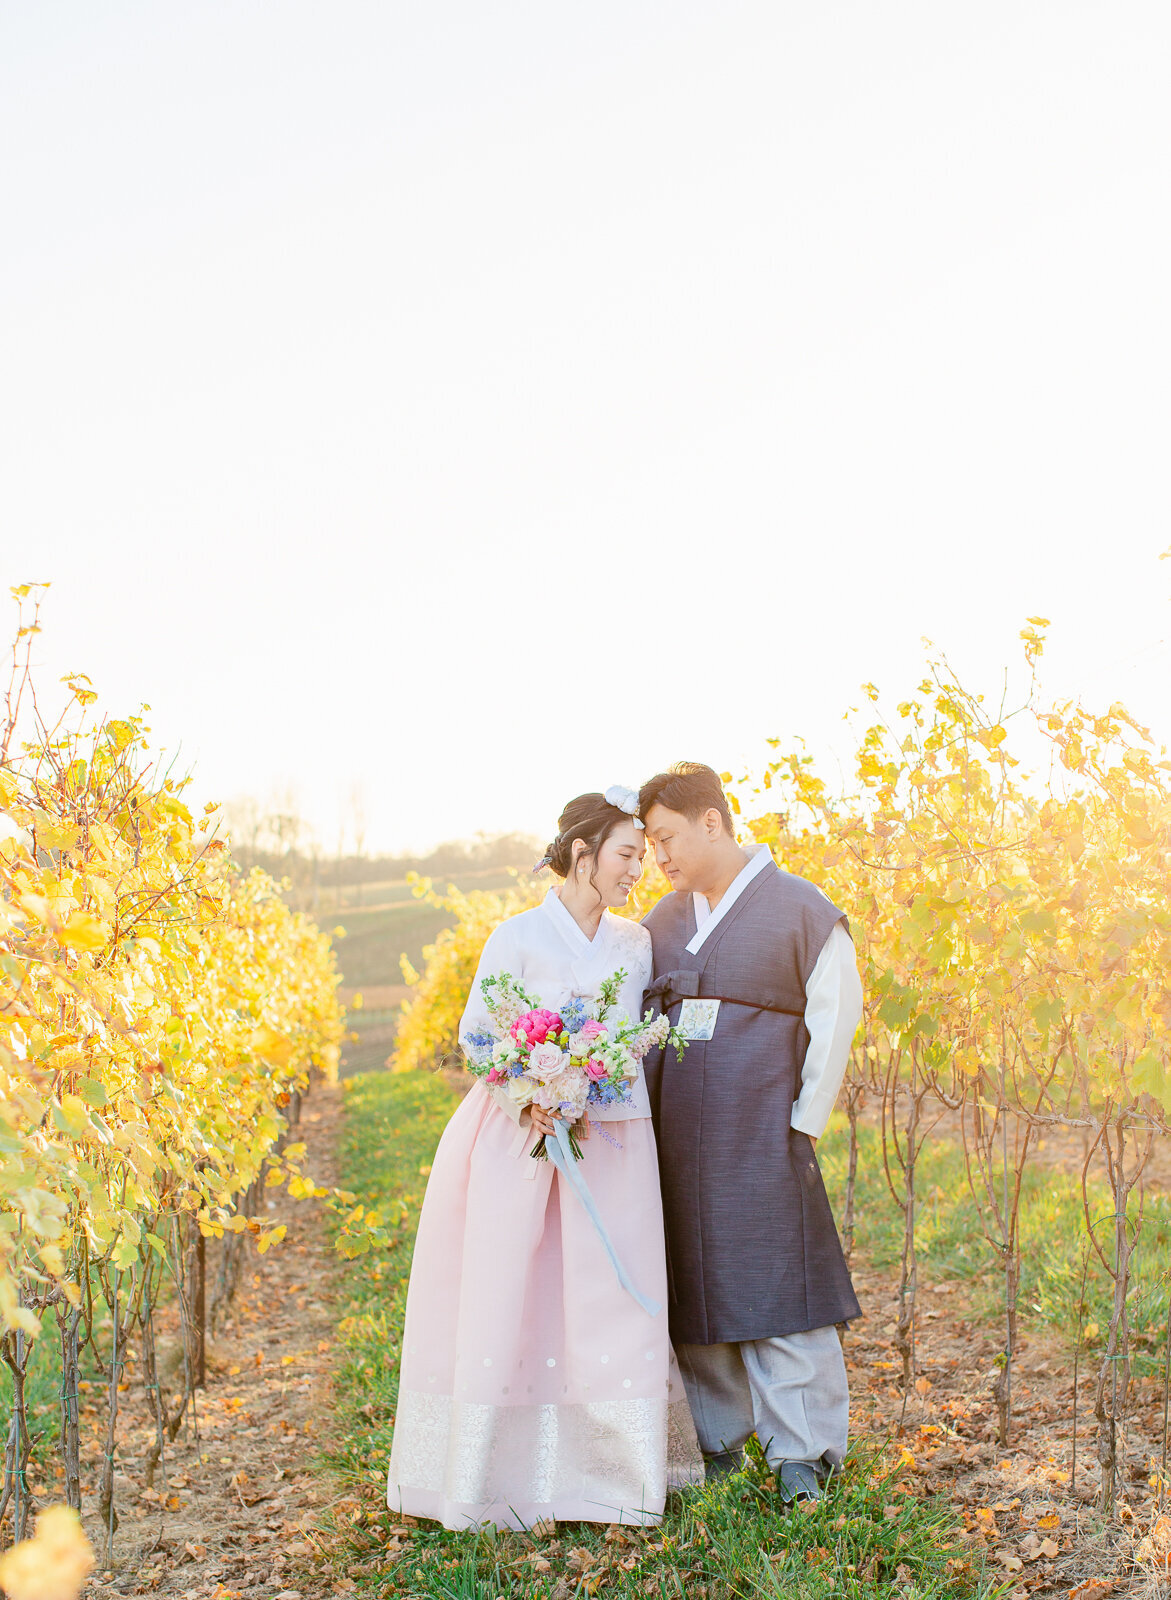 Bride and groom forehead to forehead in the vineyard at Stone Tower Winery in Leesburg, Virginia. Captured by Bethany Aubre Photography.